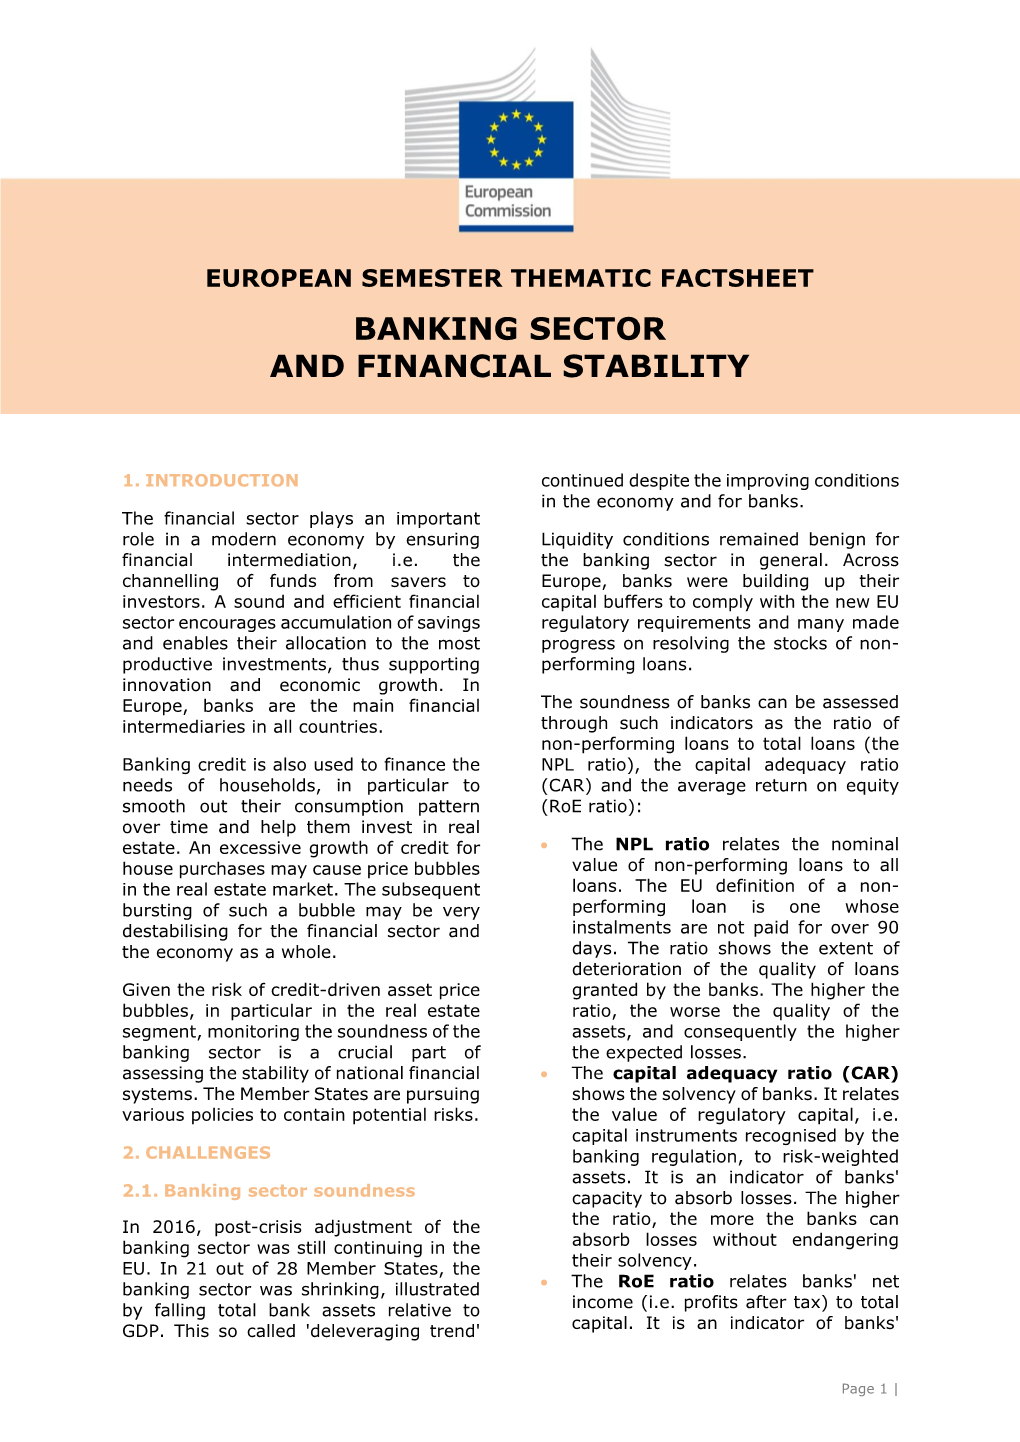 Banking Sector and Financial Stability